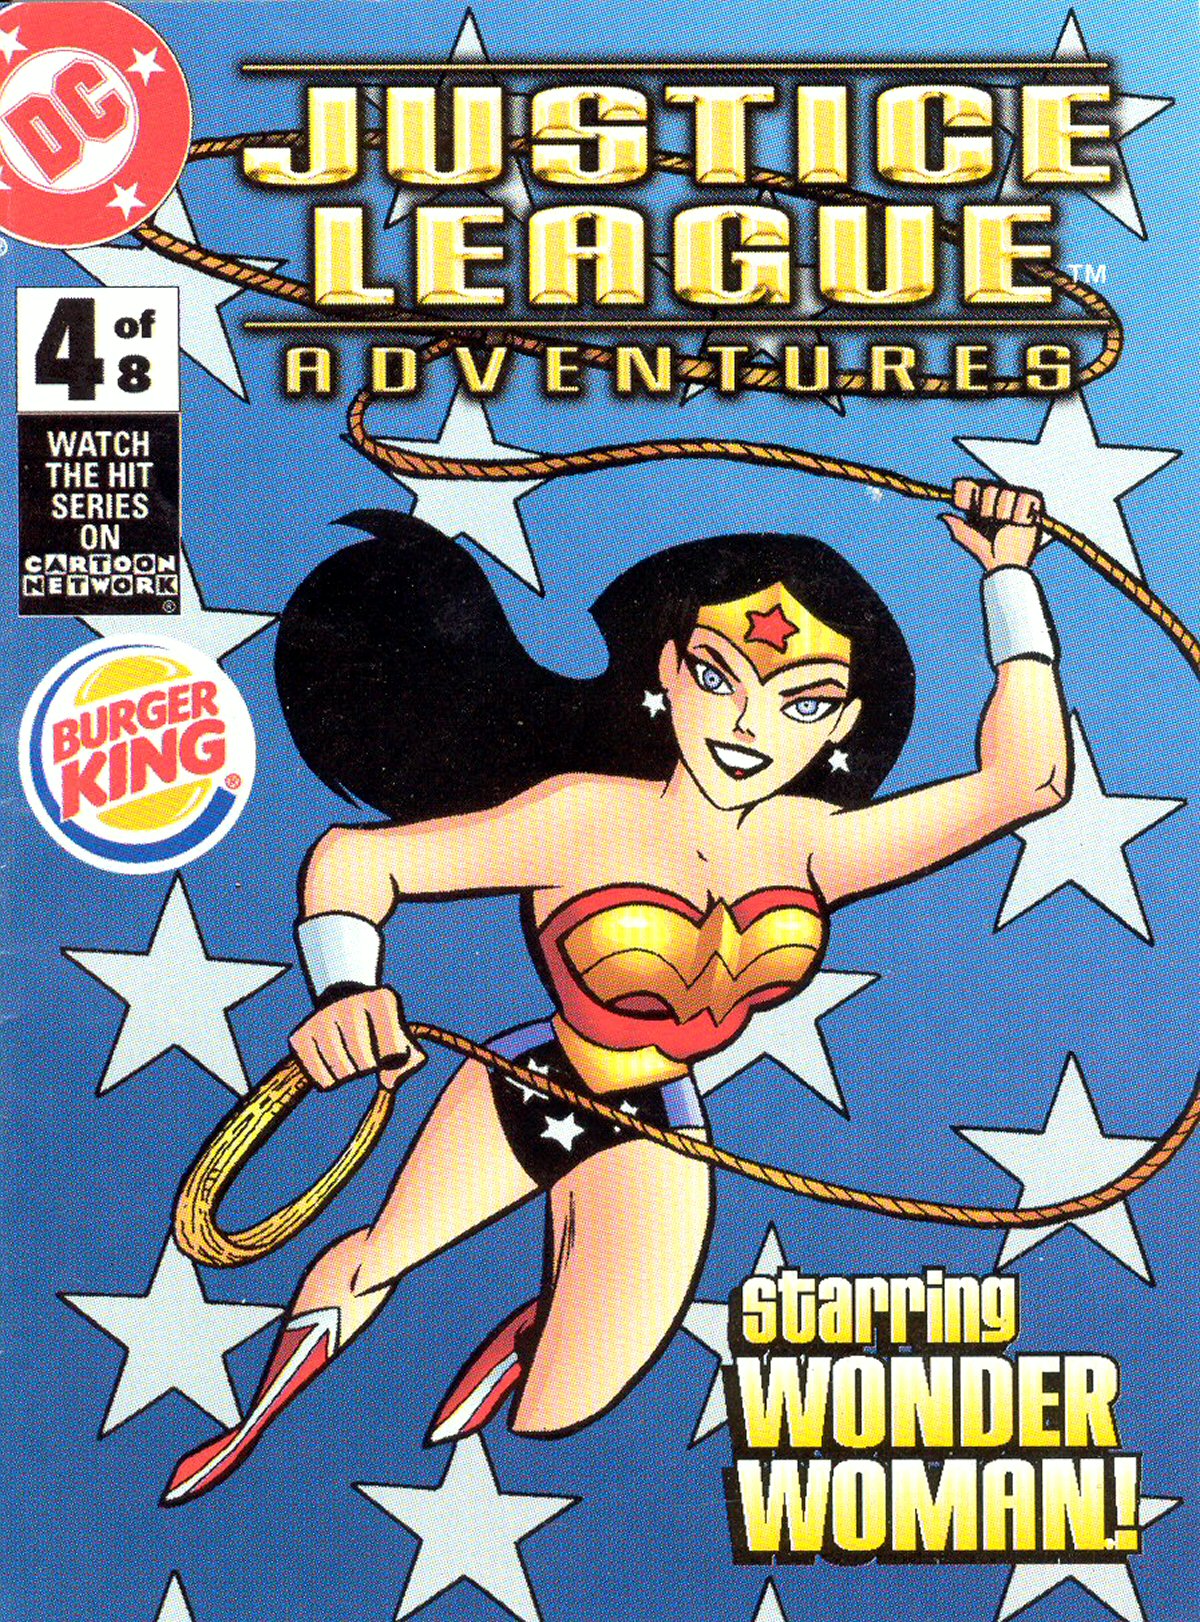 Read online Justice League Adventures [Burger King Giveaway] comic -  Issue #4 - 1